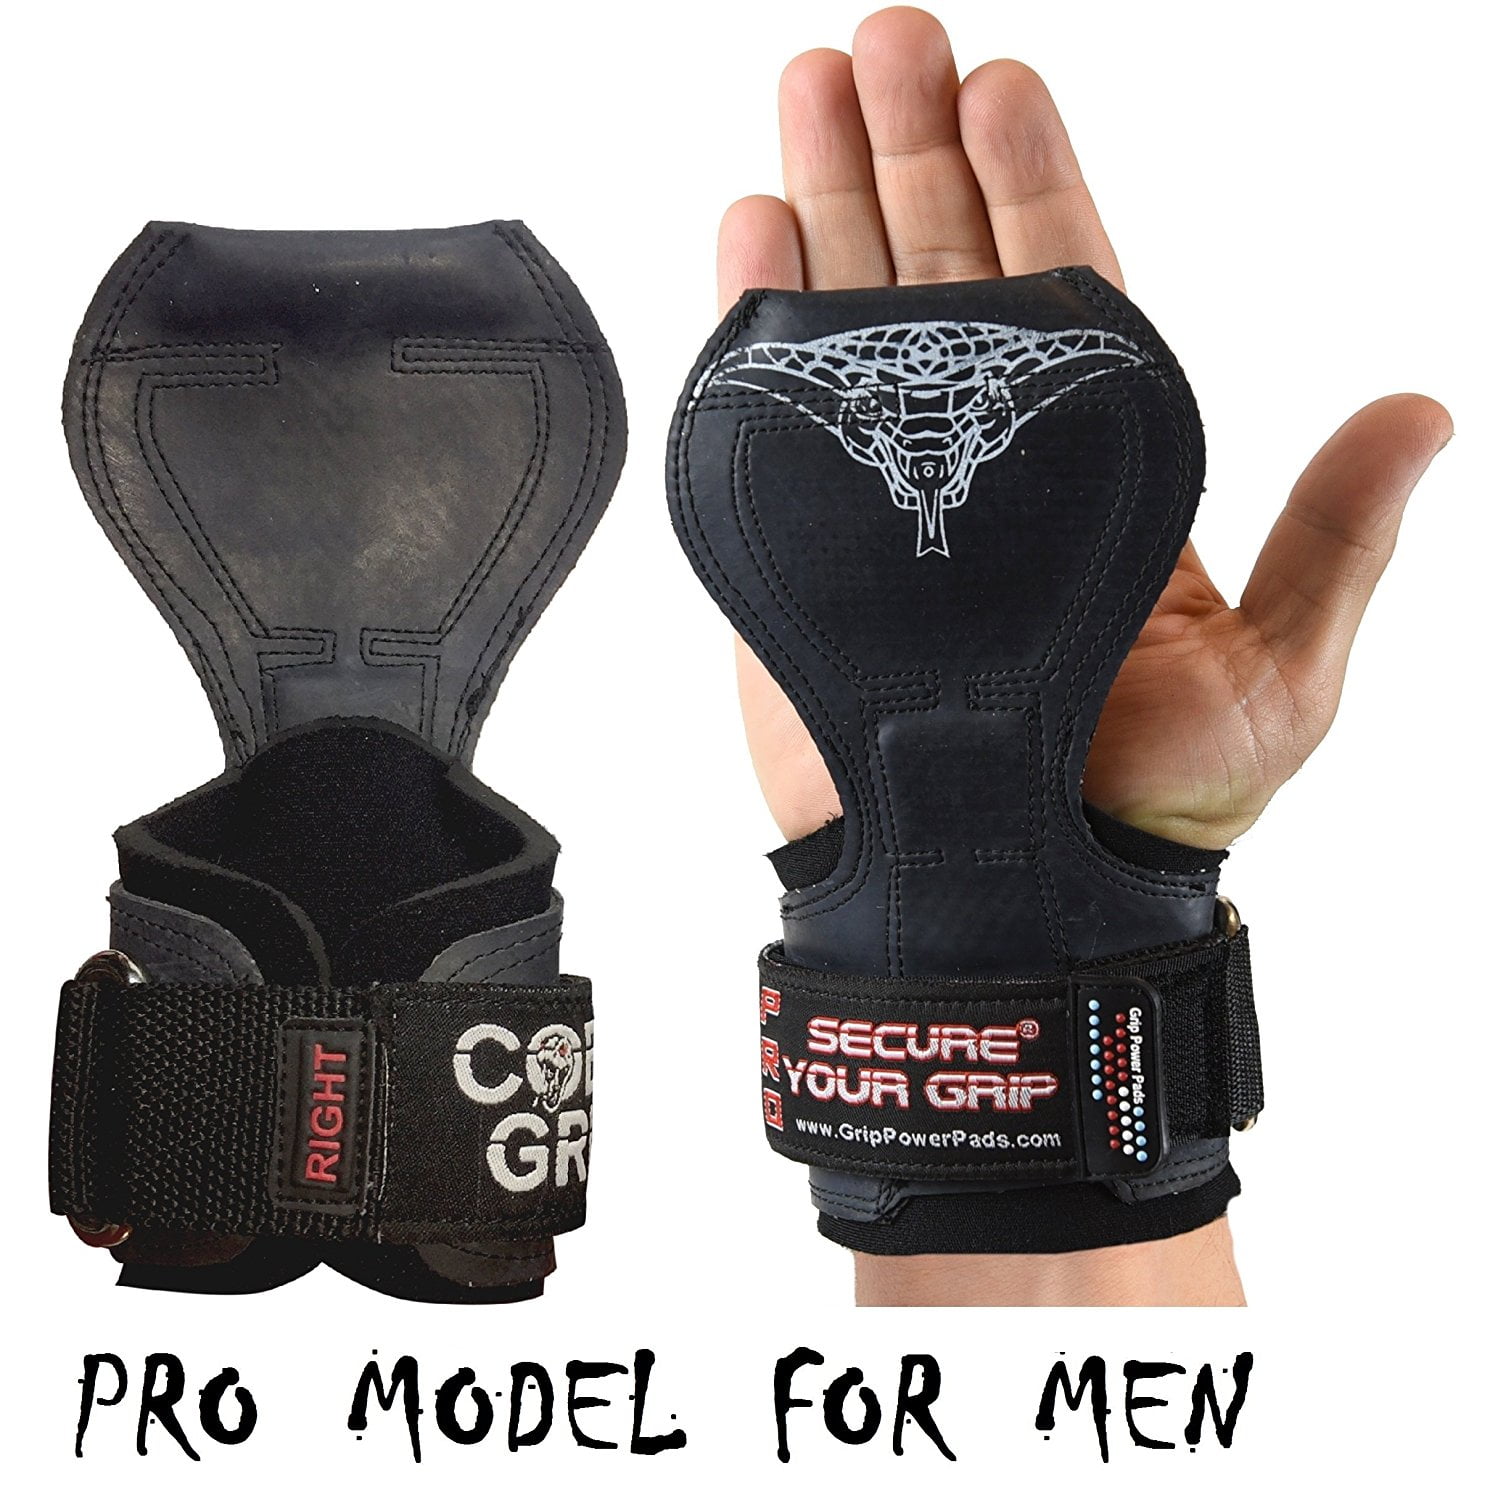 Details about   GRIP POWER PADS® Foam Lifting Grips The Alternative To Gym Gloves and Straps New 